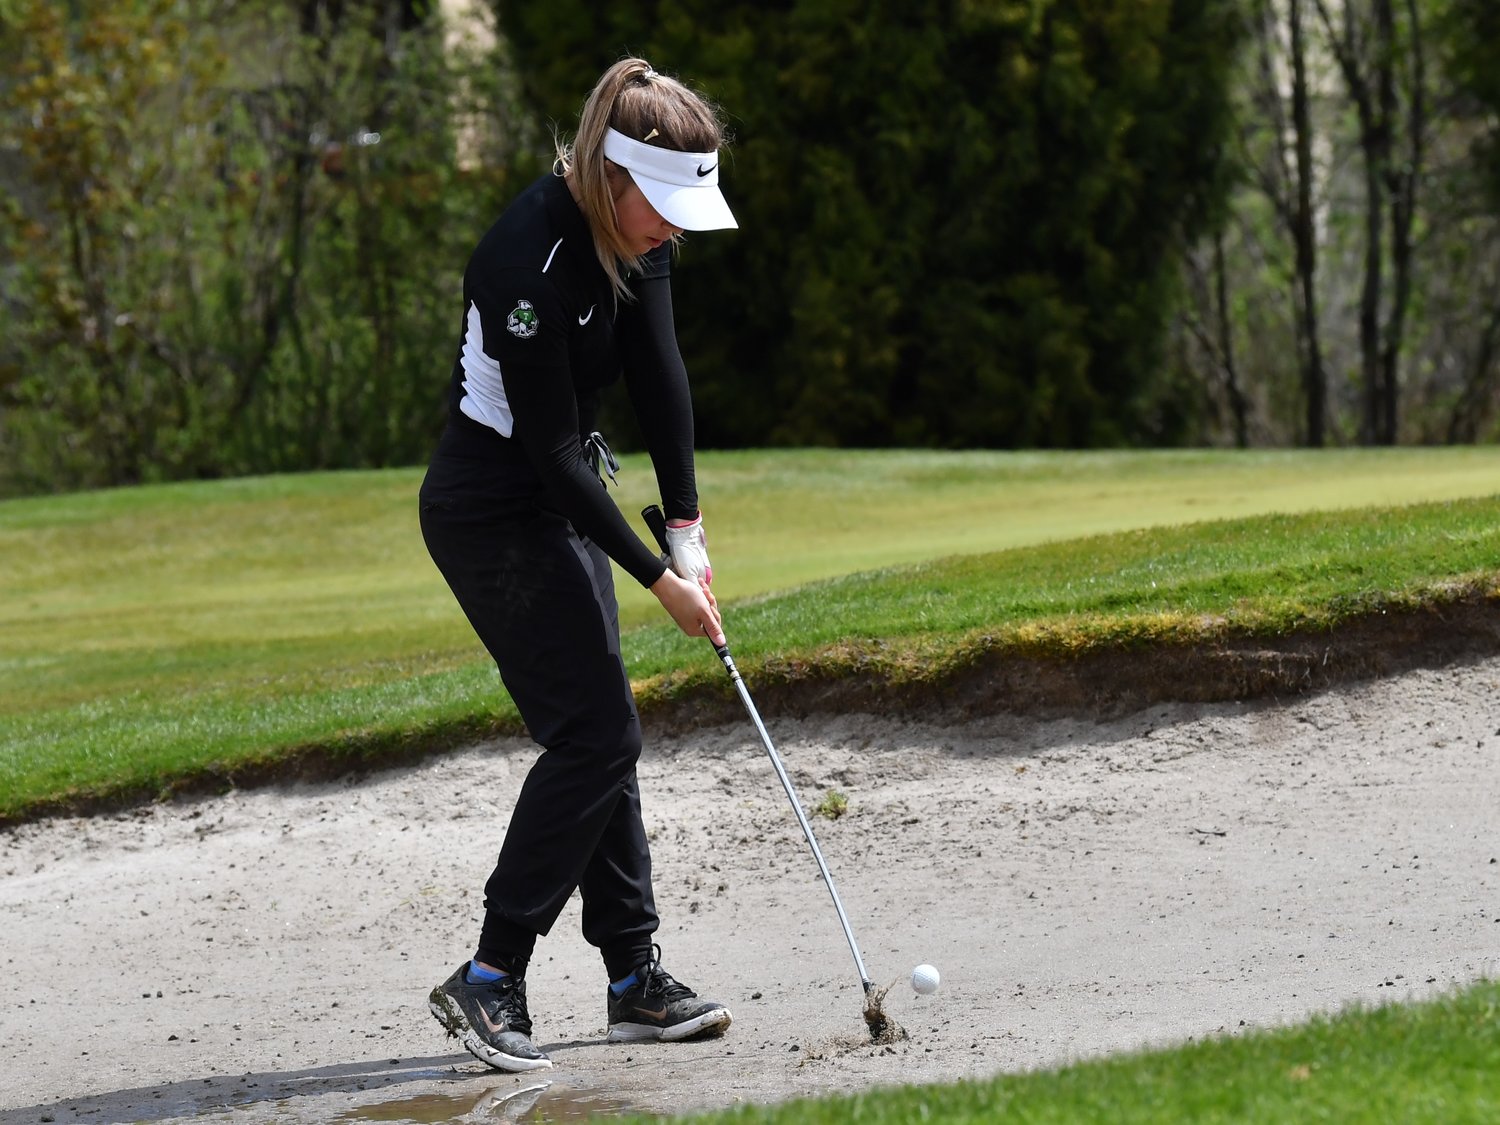 Tumwater junior Sammie Jasper chips the ball out of the bunker on the ninth hole, at the Cowlitz Invitational at Mint Valley on April 27.